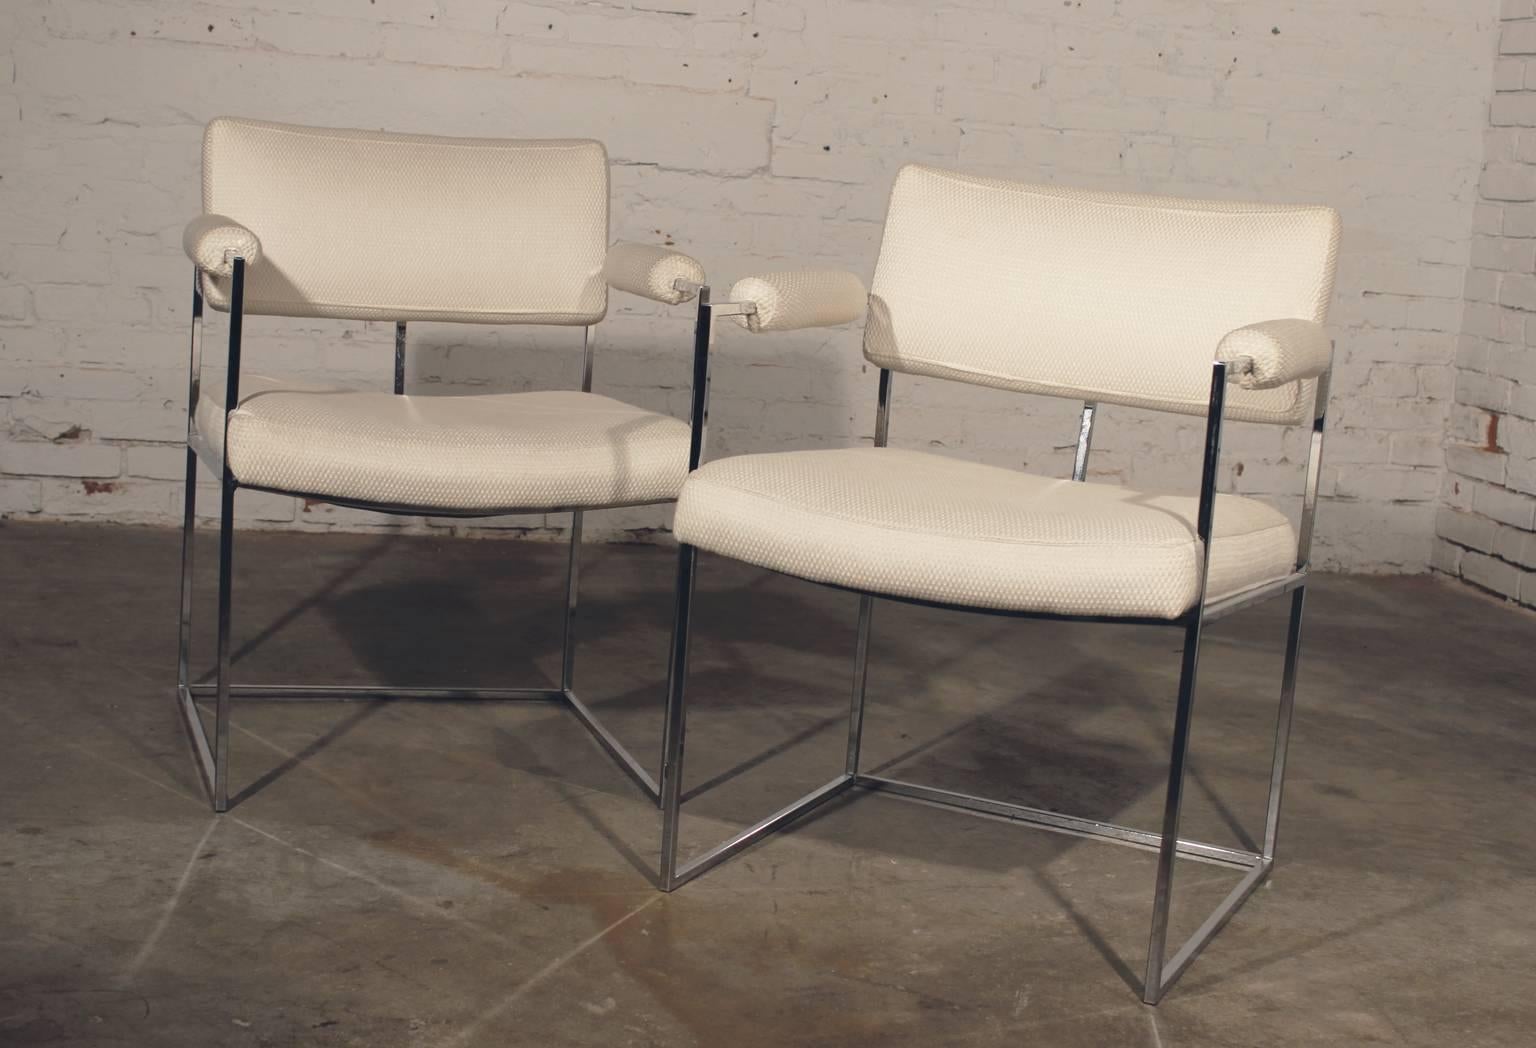 Vintage pair of white and chrome Milo Baughman for Thayer Coggin 1188 dining chairs. In age appropriate condition but with repairs.

The 1188 chair by Milo Baughman is touted as being his favorite chairs. He even chose it to use in the home of his